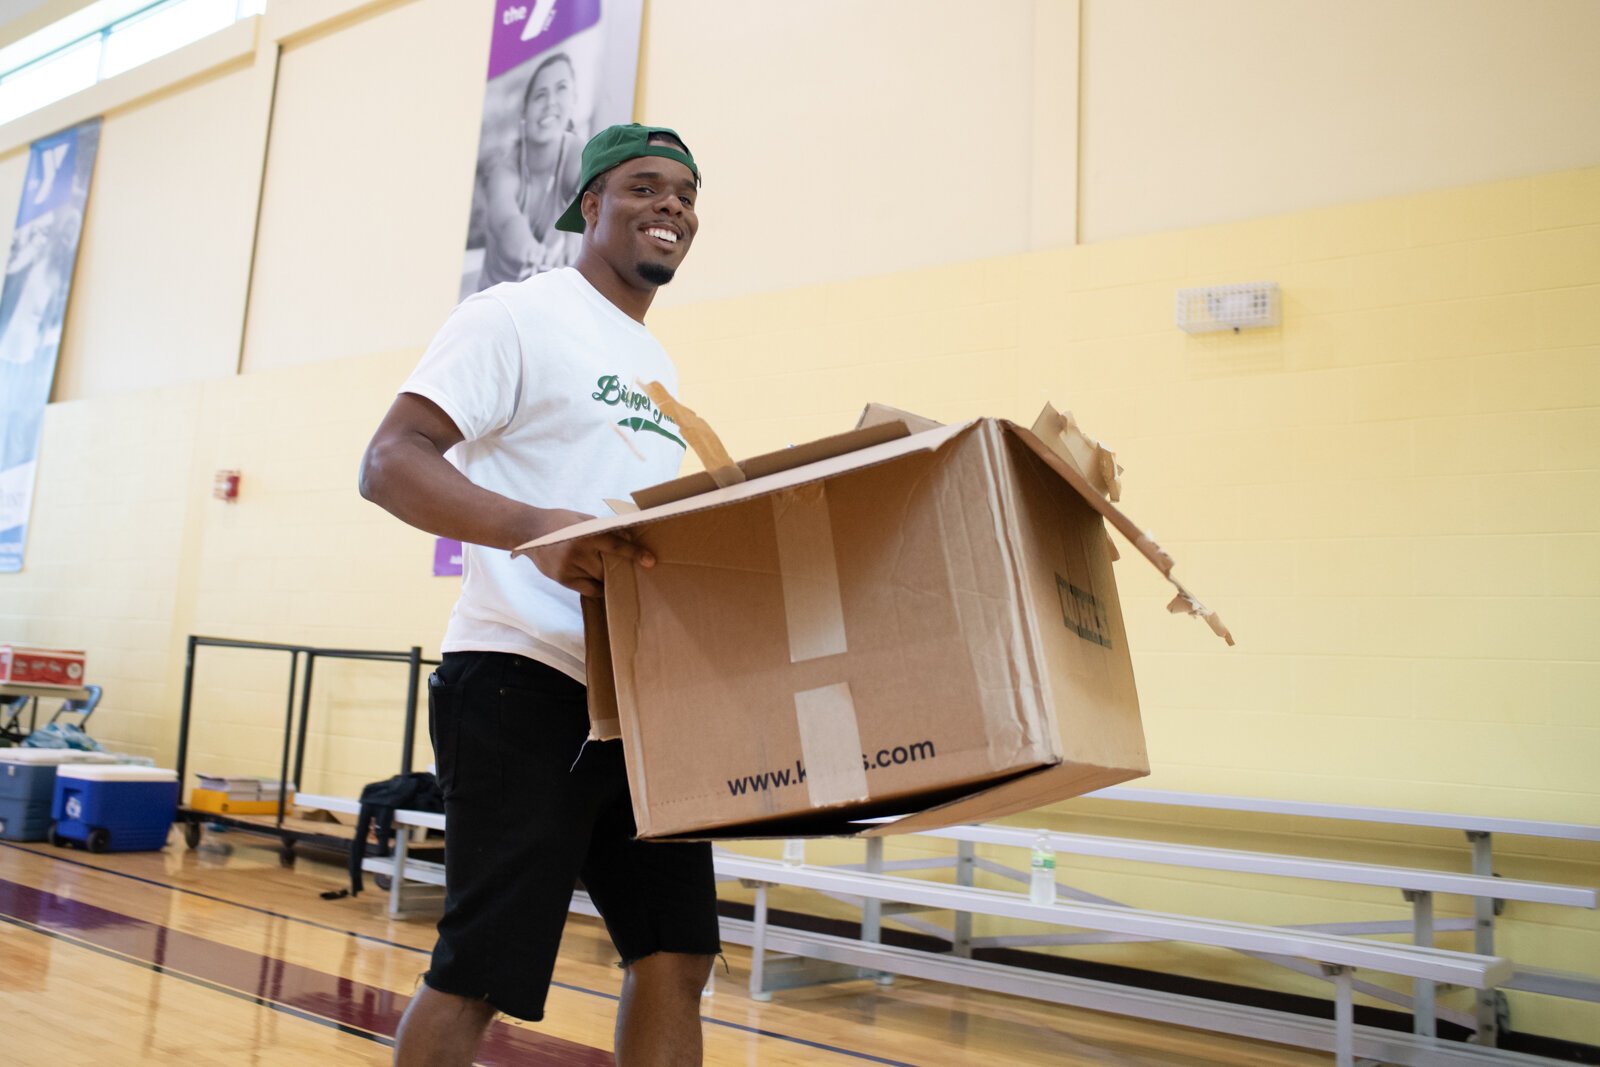 Bigger Than Us volunteer Lorenzo Holman is all smiles as he helps by cleaning up boxes before the start of the Book Bag Giveaway at Renaissance Pointe YMCA, 2323 Bowser Ave.